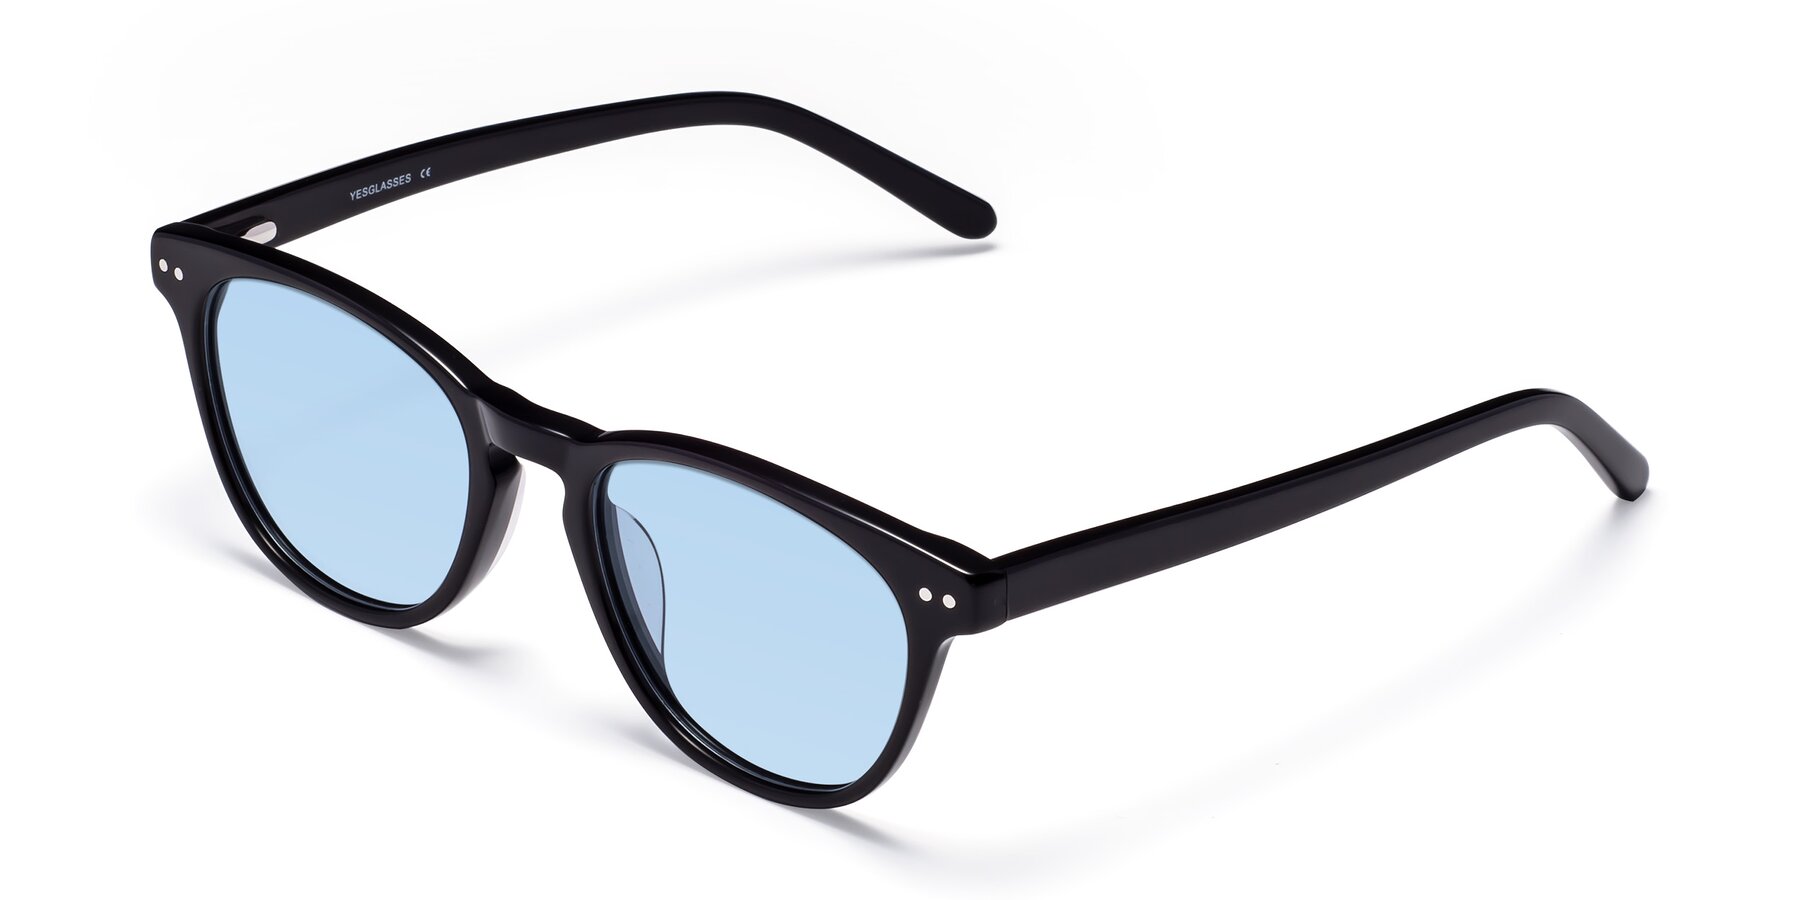 Angle of Blaze in Black with Light Blue Tinted Lenses